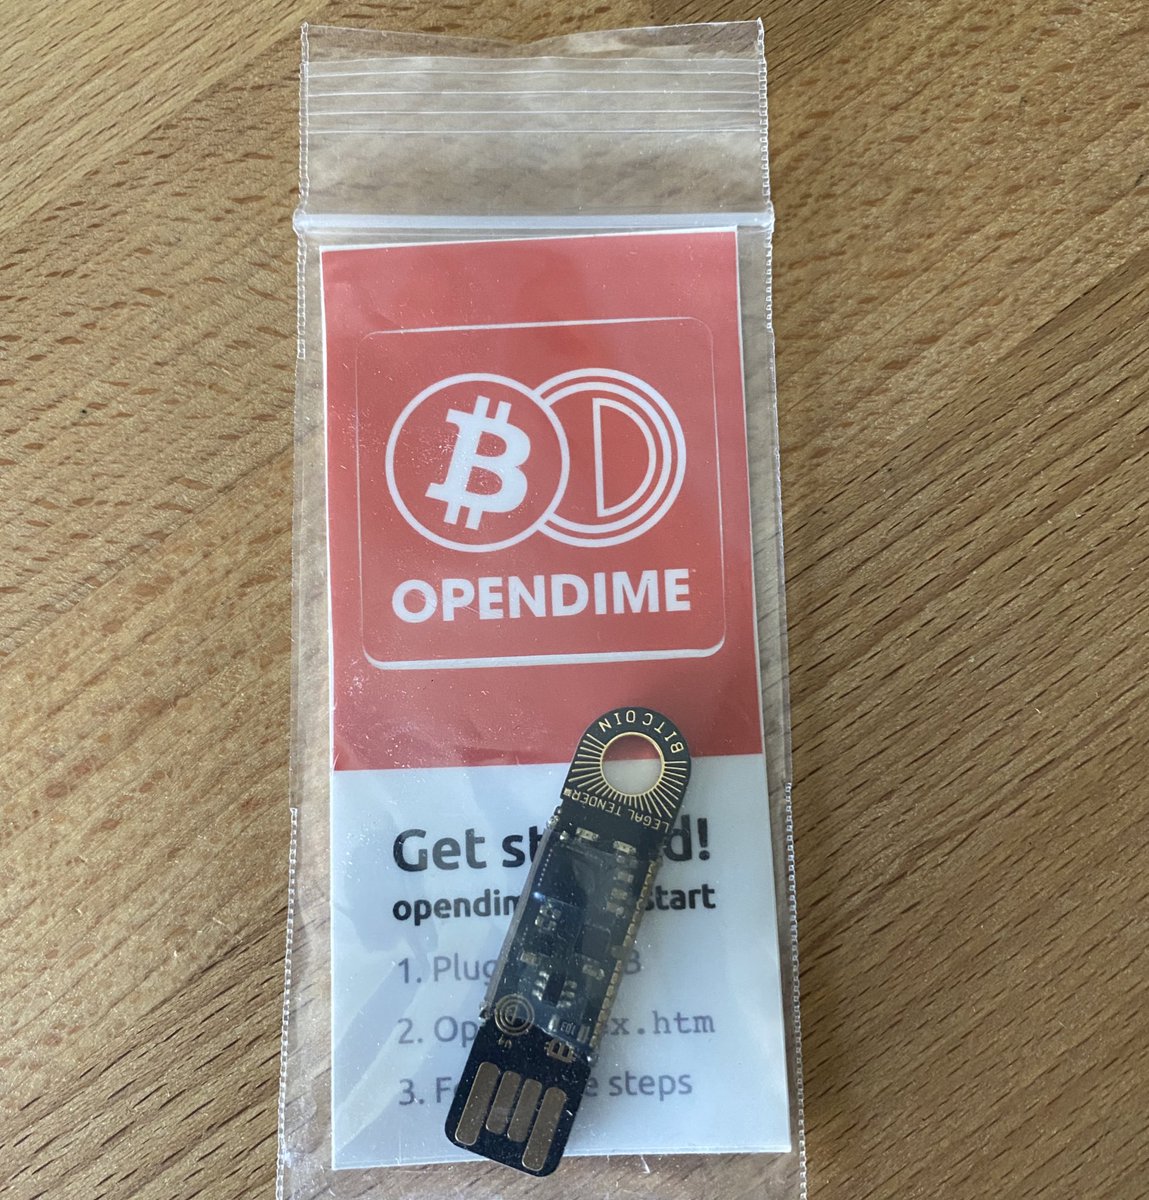 THREAD - Just used an  @OPENDIME for the first time #btc    #bitcoin  